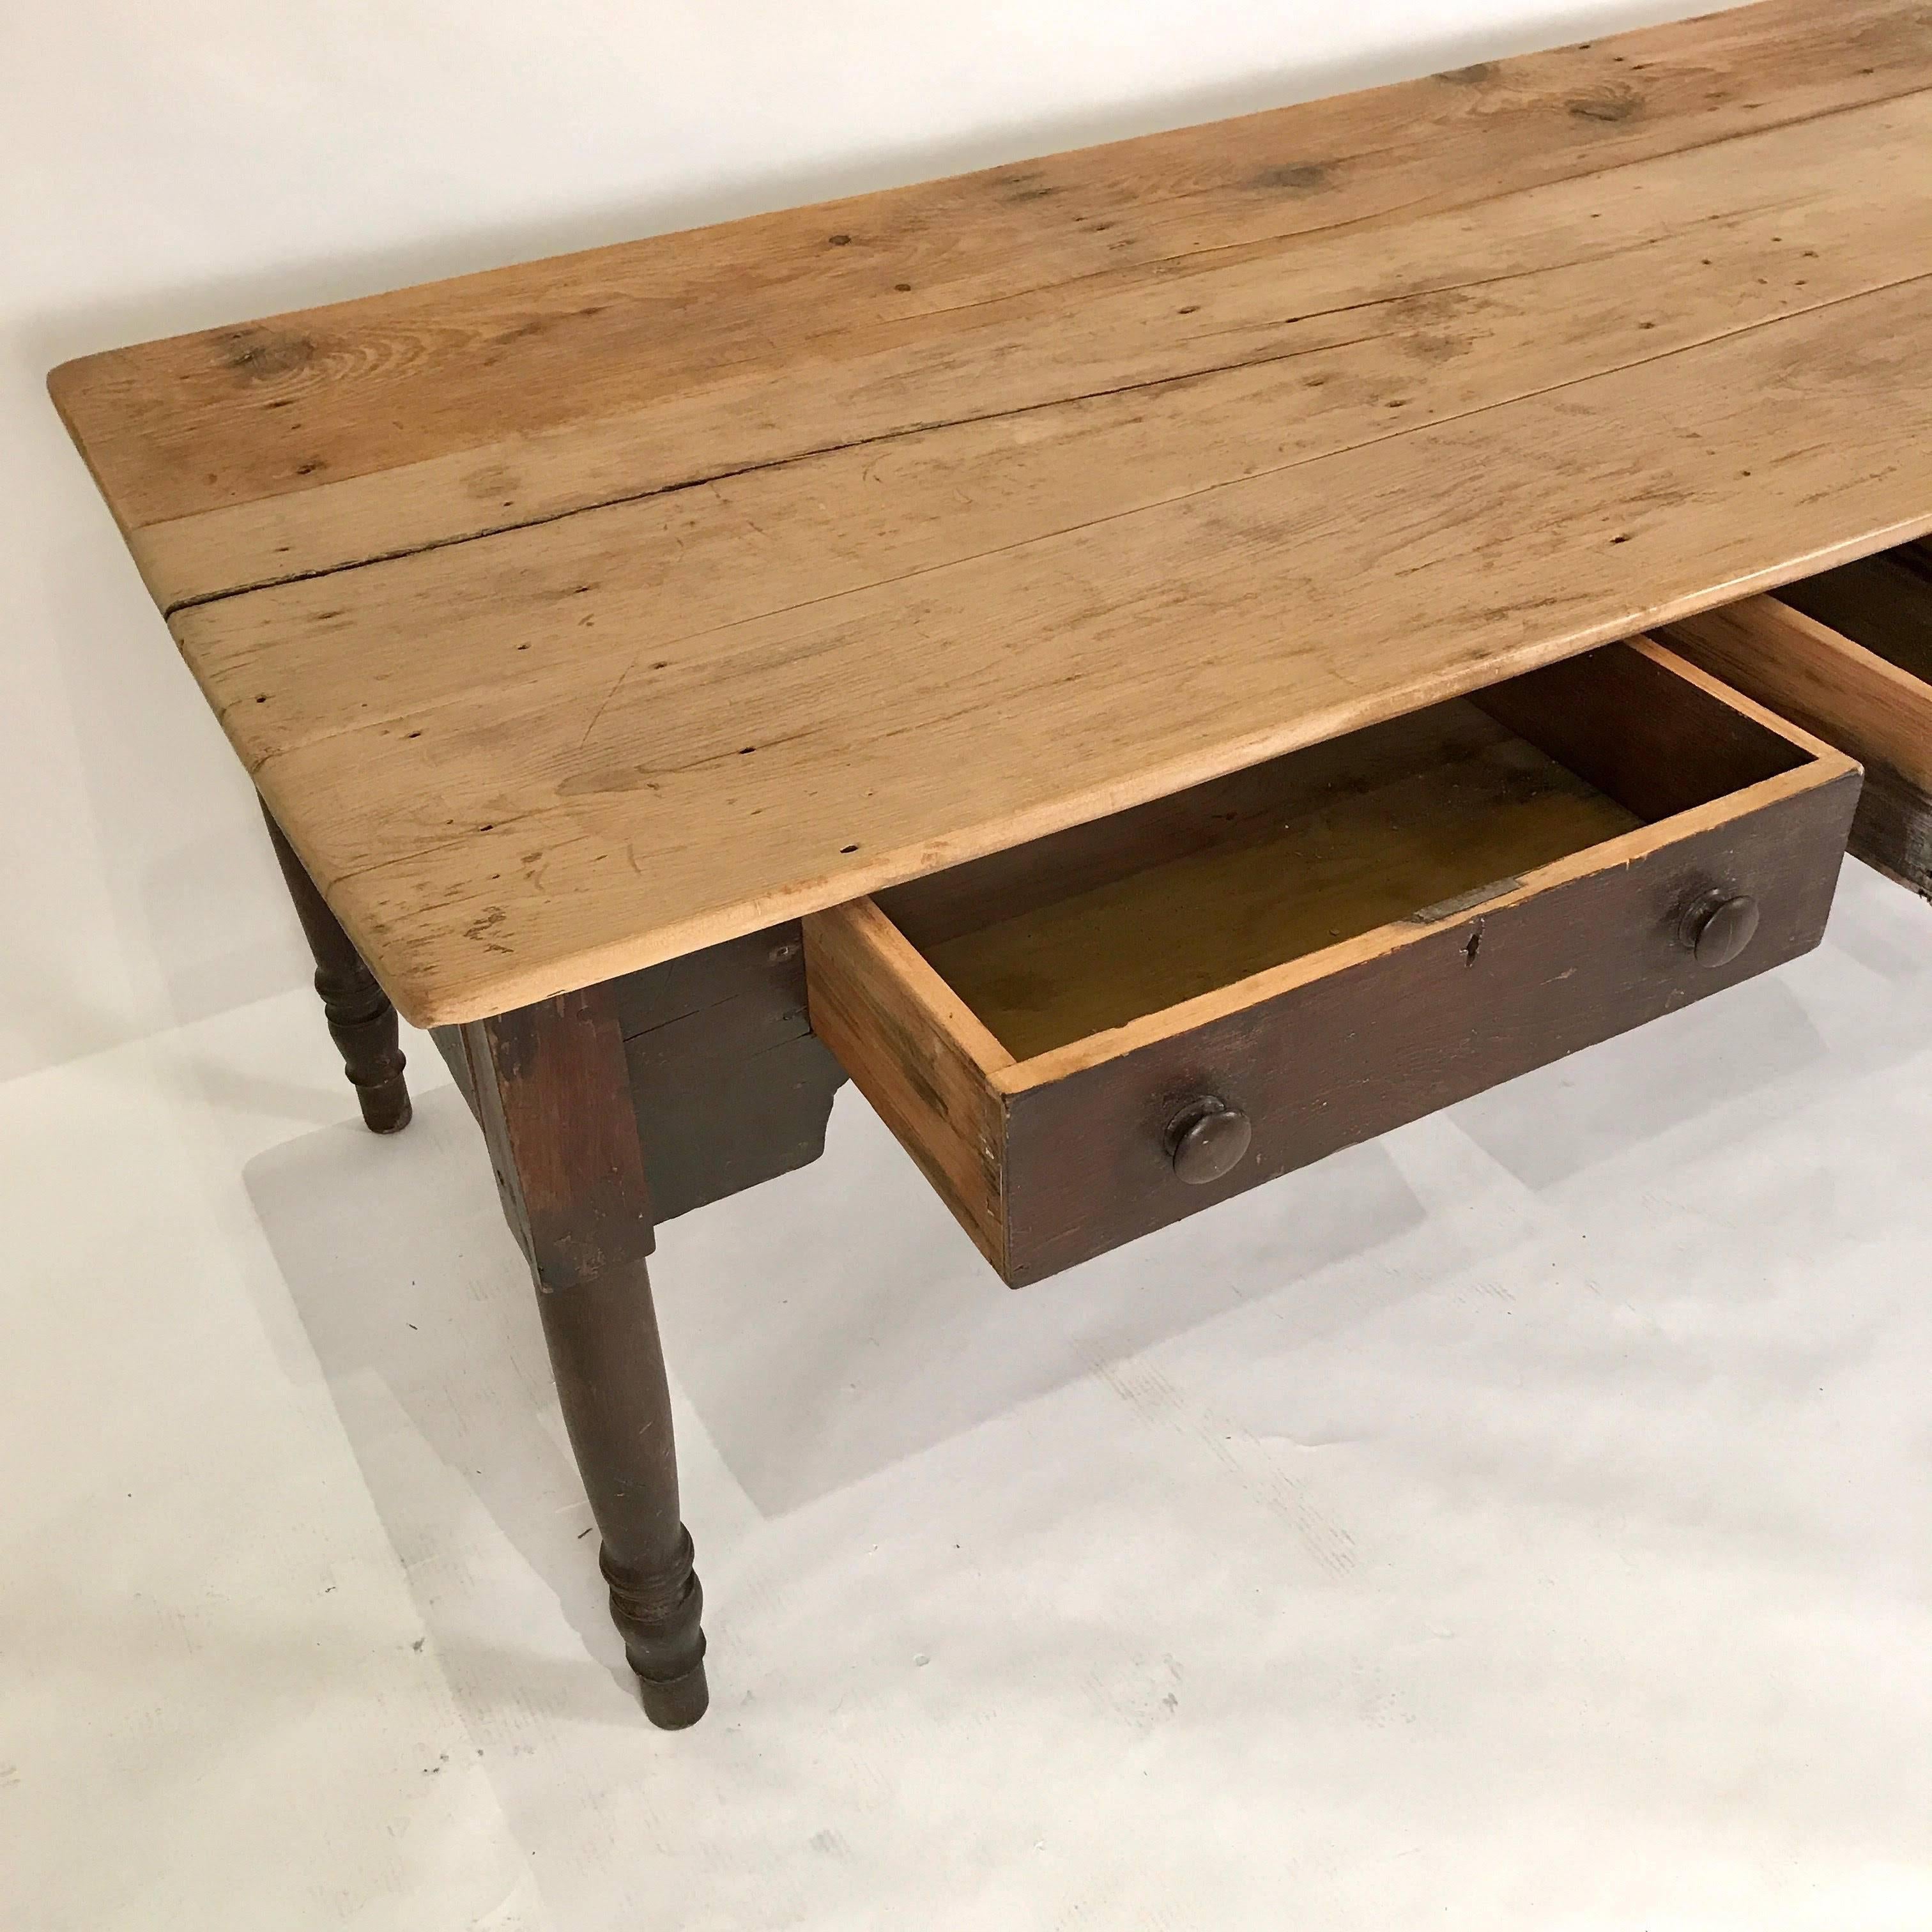 20th Century French Scubbed Top Provincial Farm Table with Three Drawers